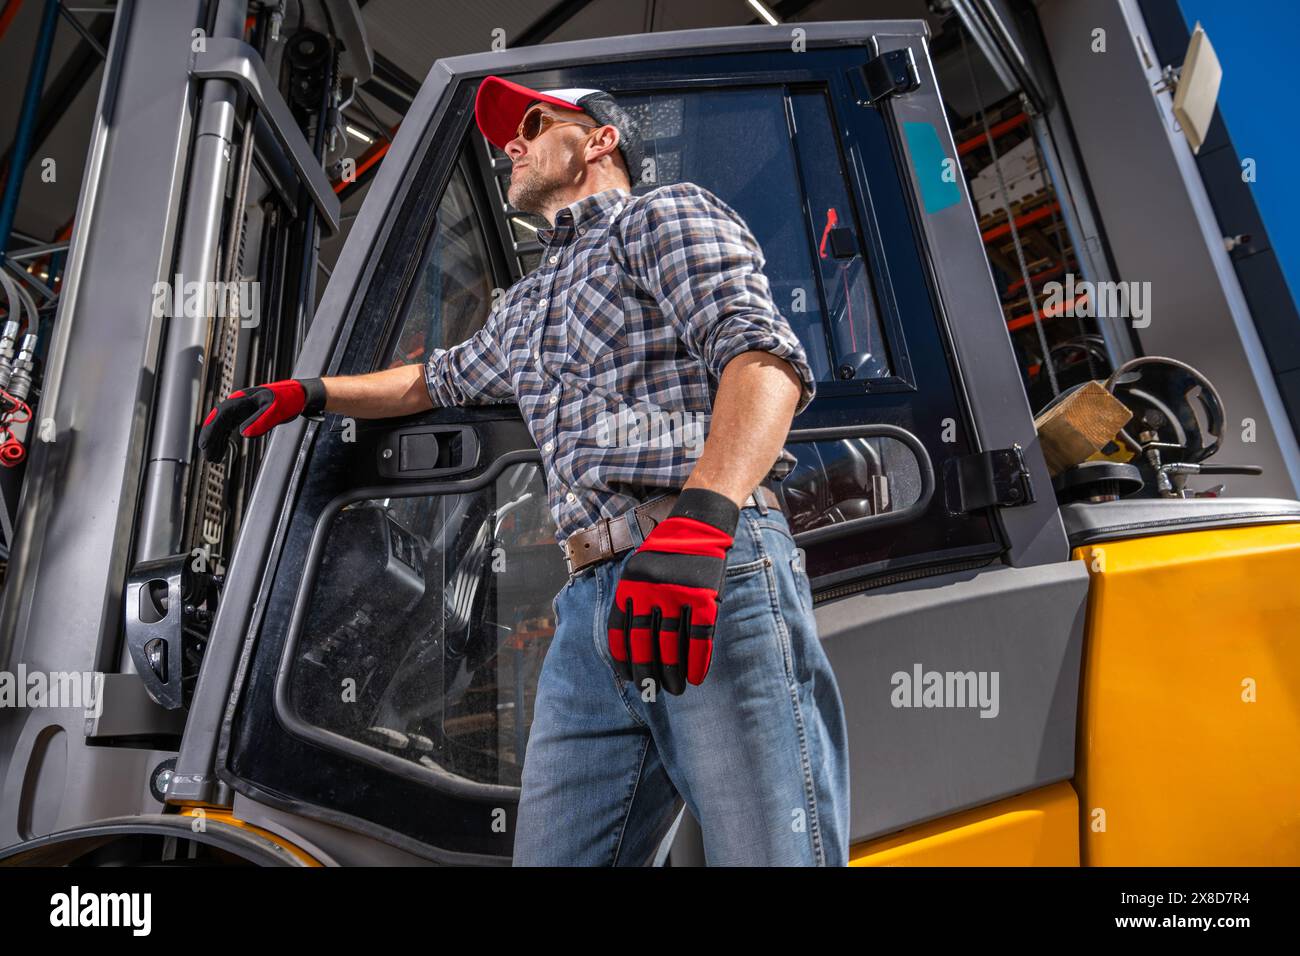 A worker in work attire stands confidently in front of a forklift in an industrial setting. Stock Photo